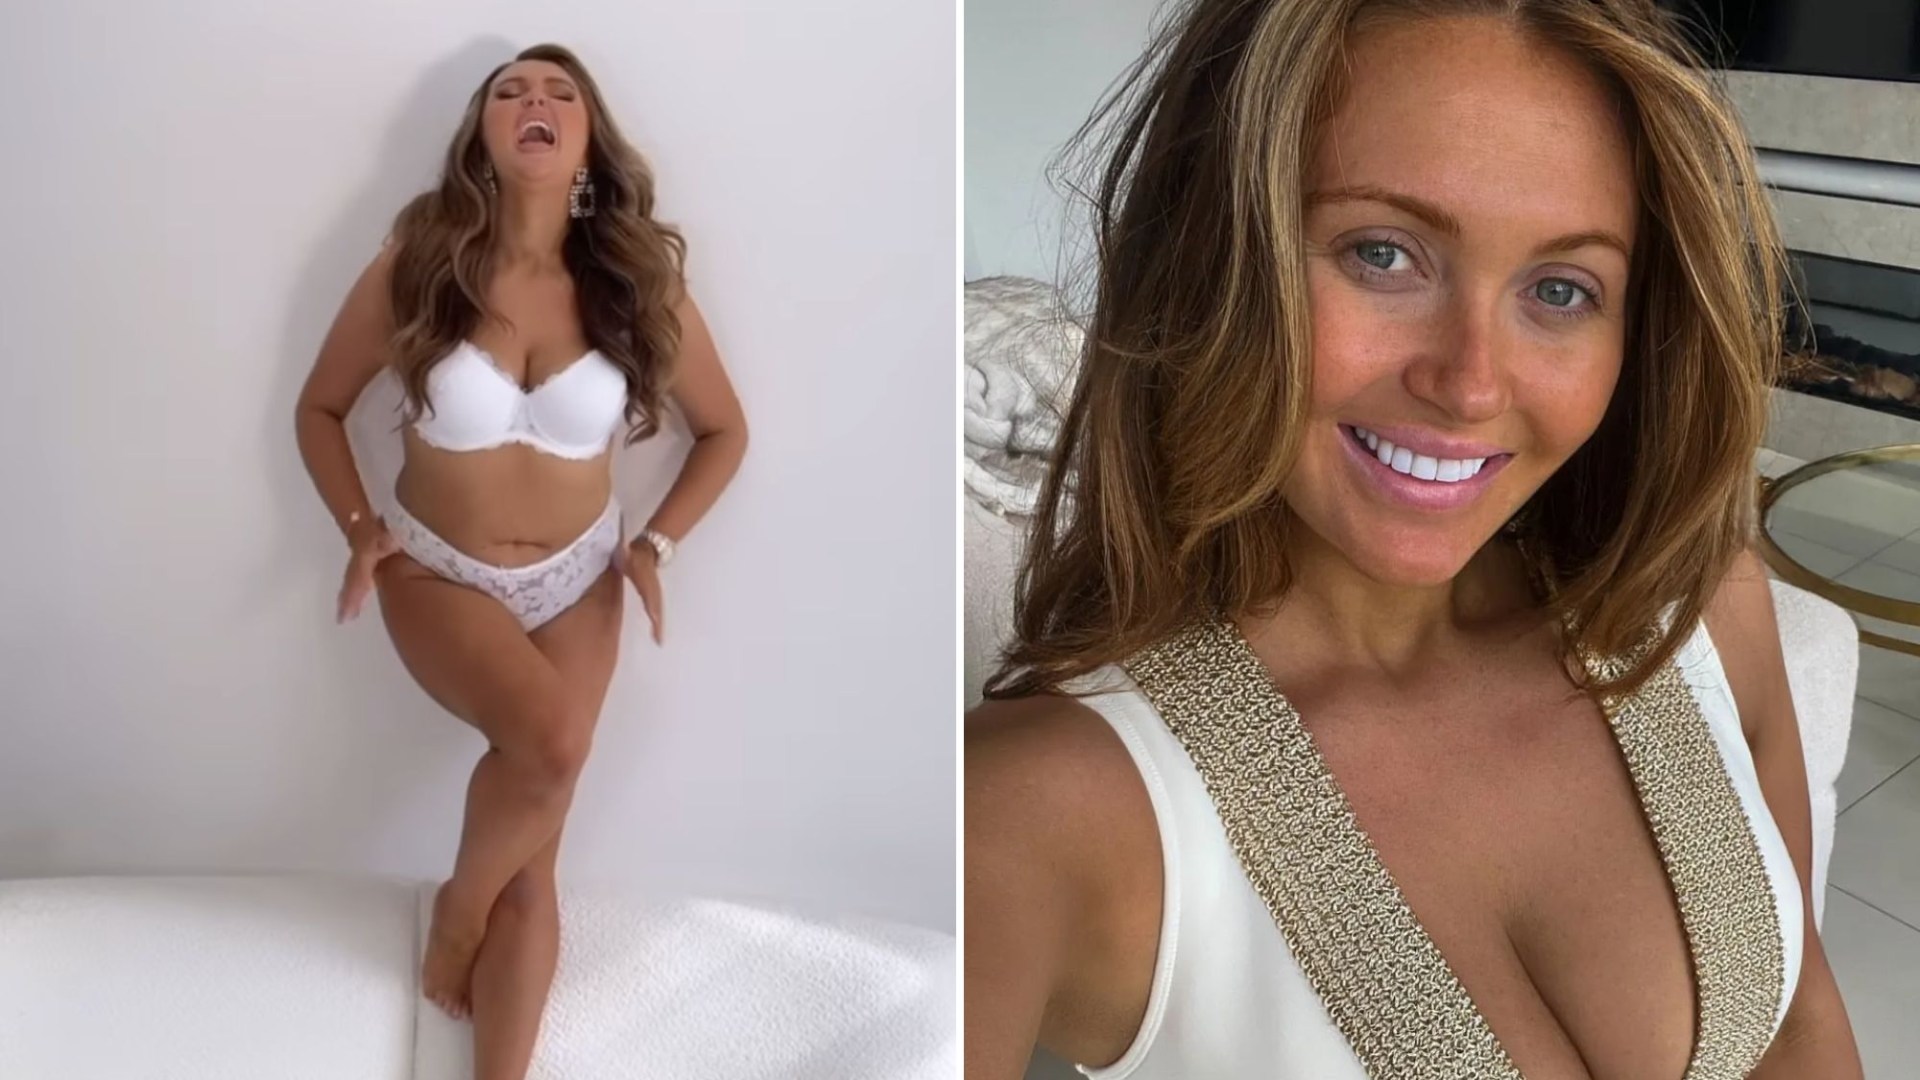 Charlotte Dawson shows off her incredible 1.5 stone weight loss as she performs sexy underwear dance [Video]